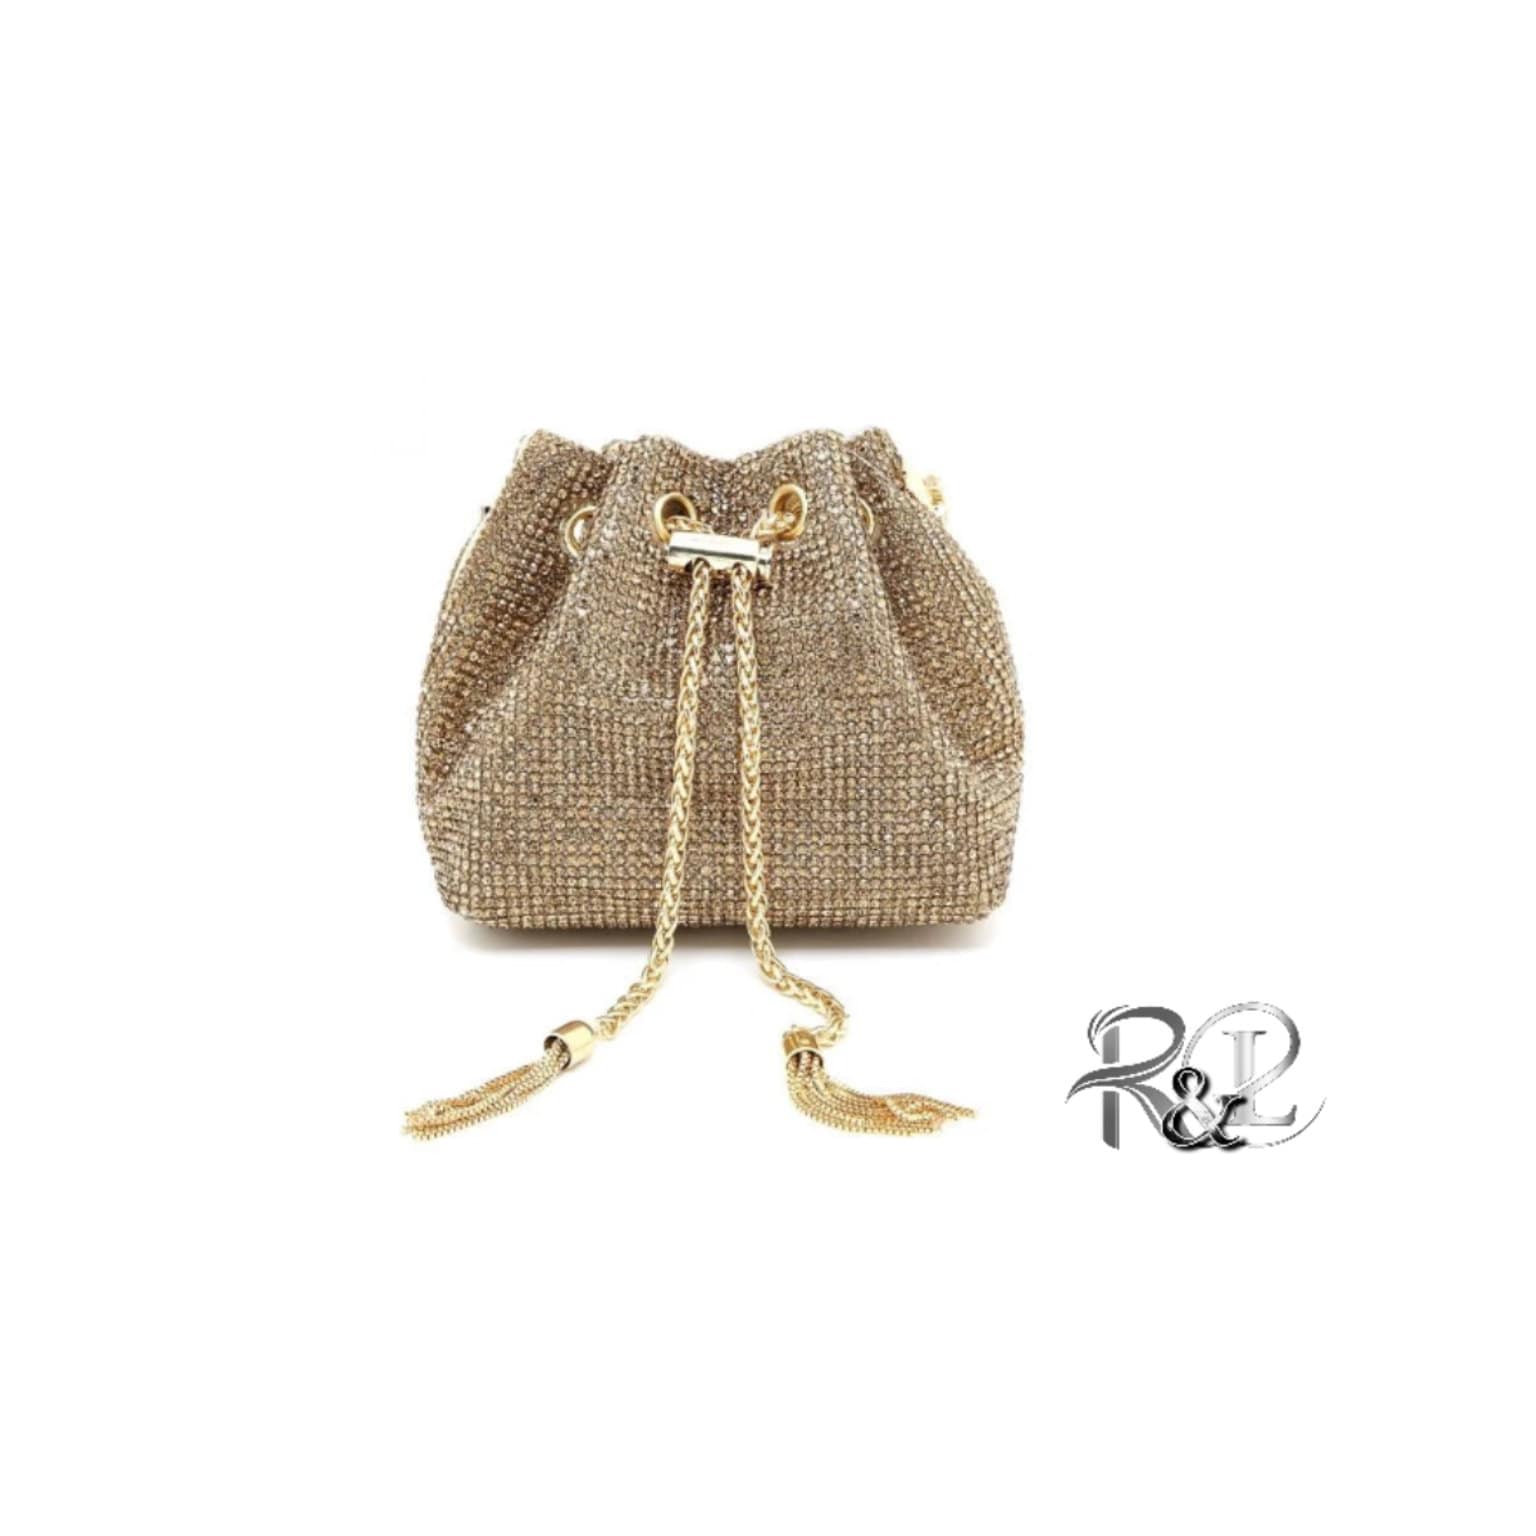 Rank A ｜LV Malesherbes Kelly Style Gold Evening Top Handle